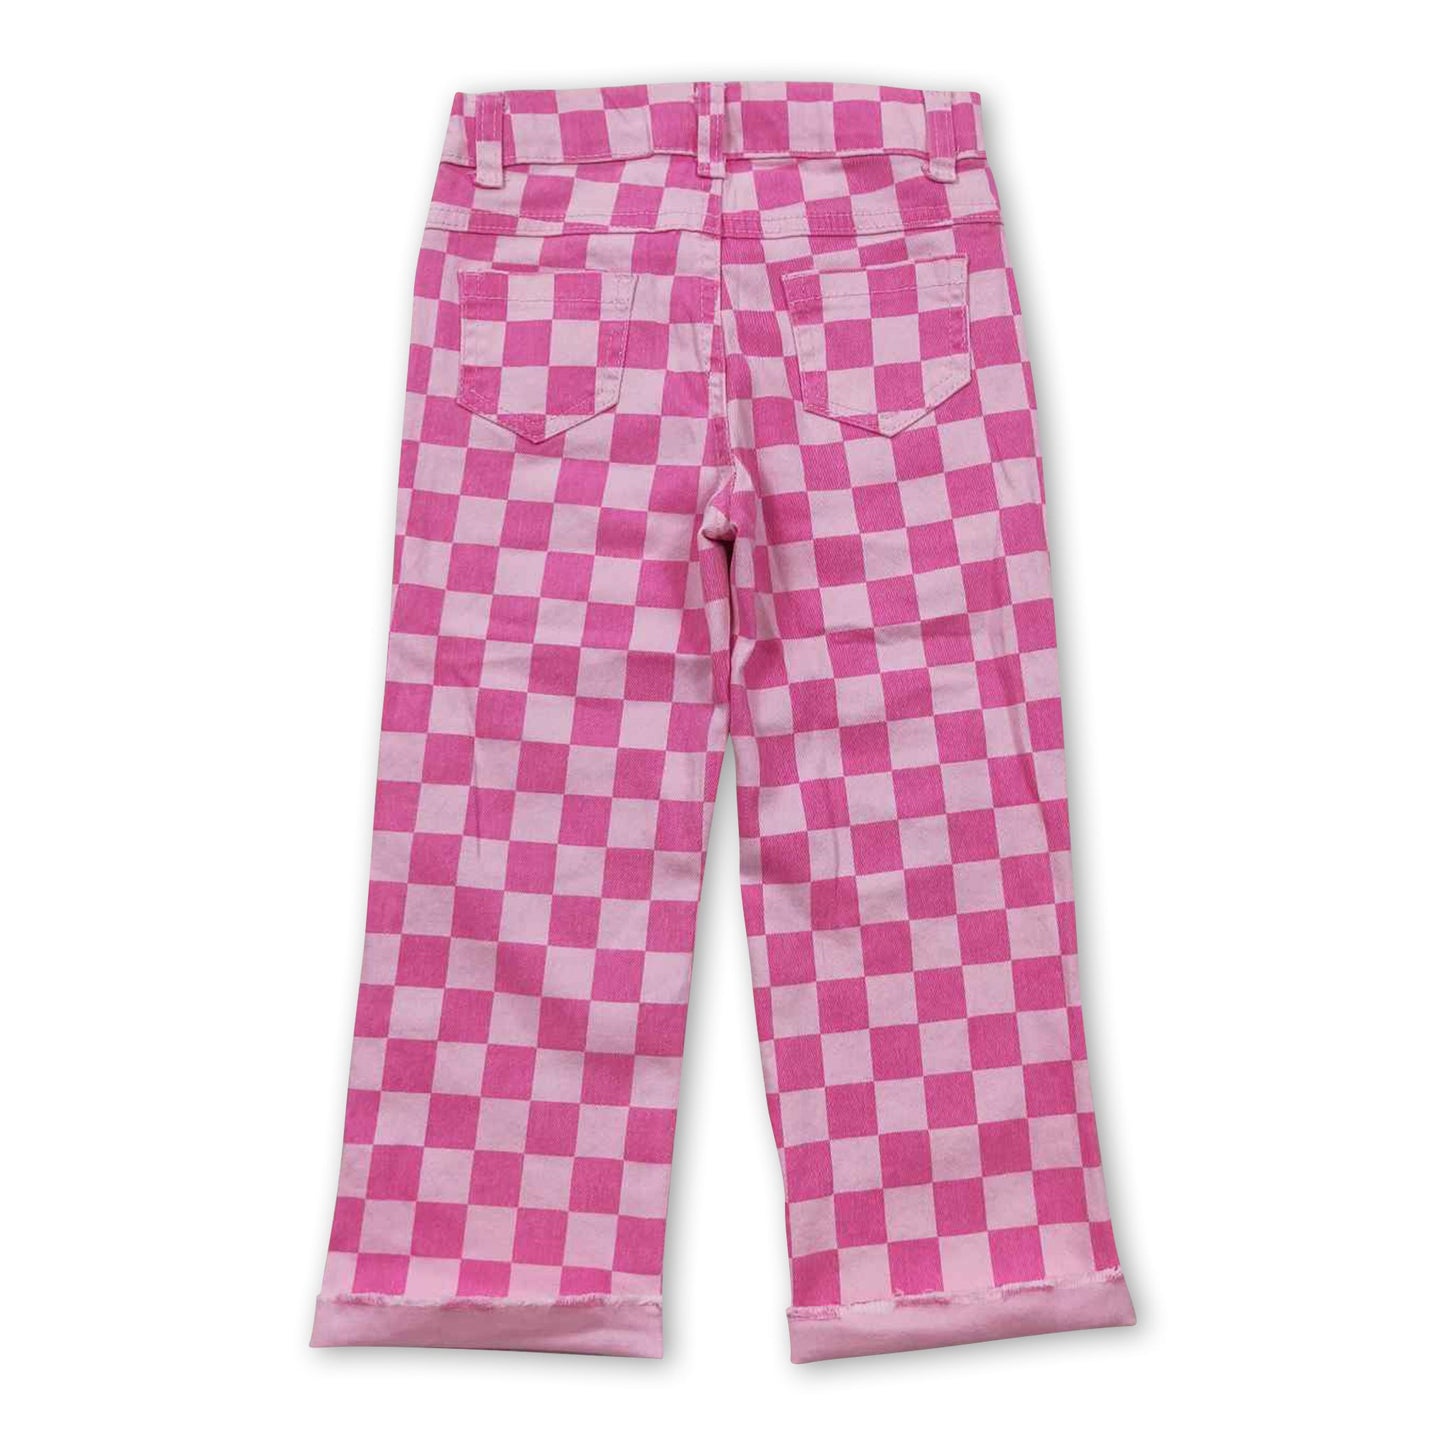 Pink checked hole baby girls jeans